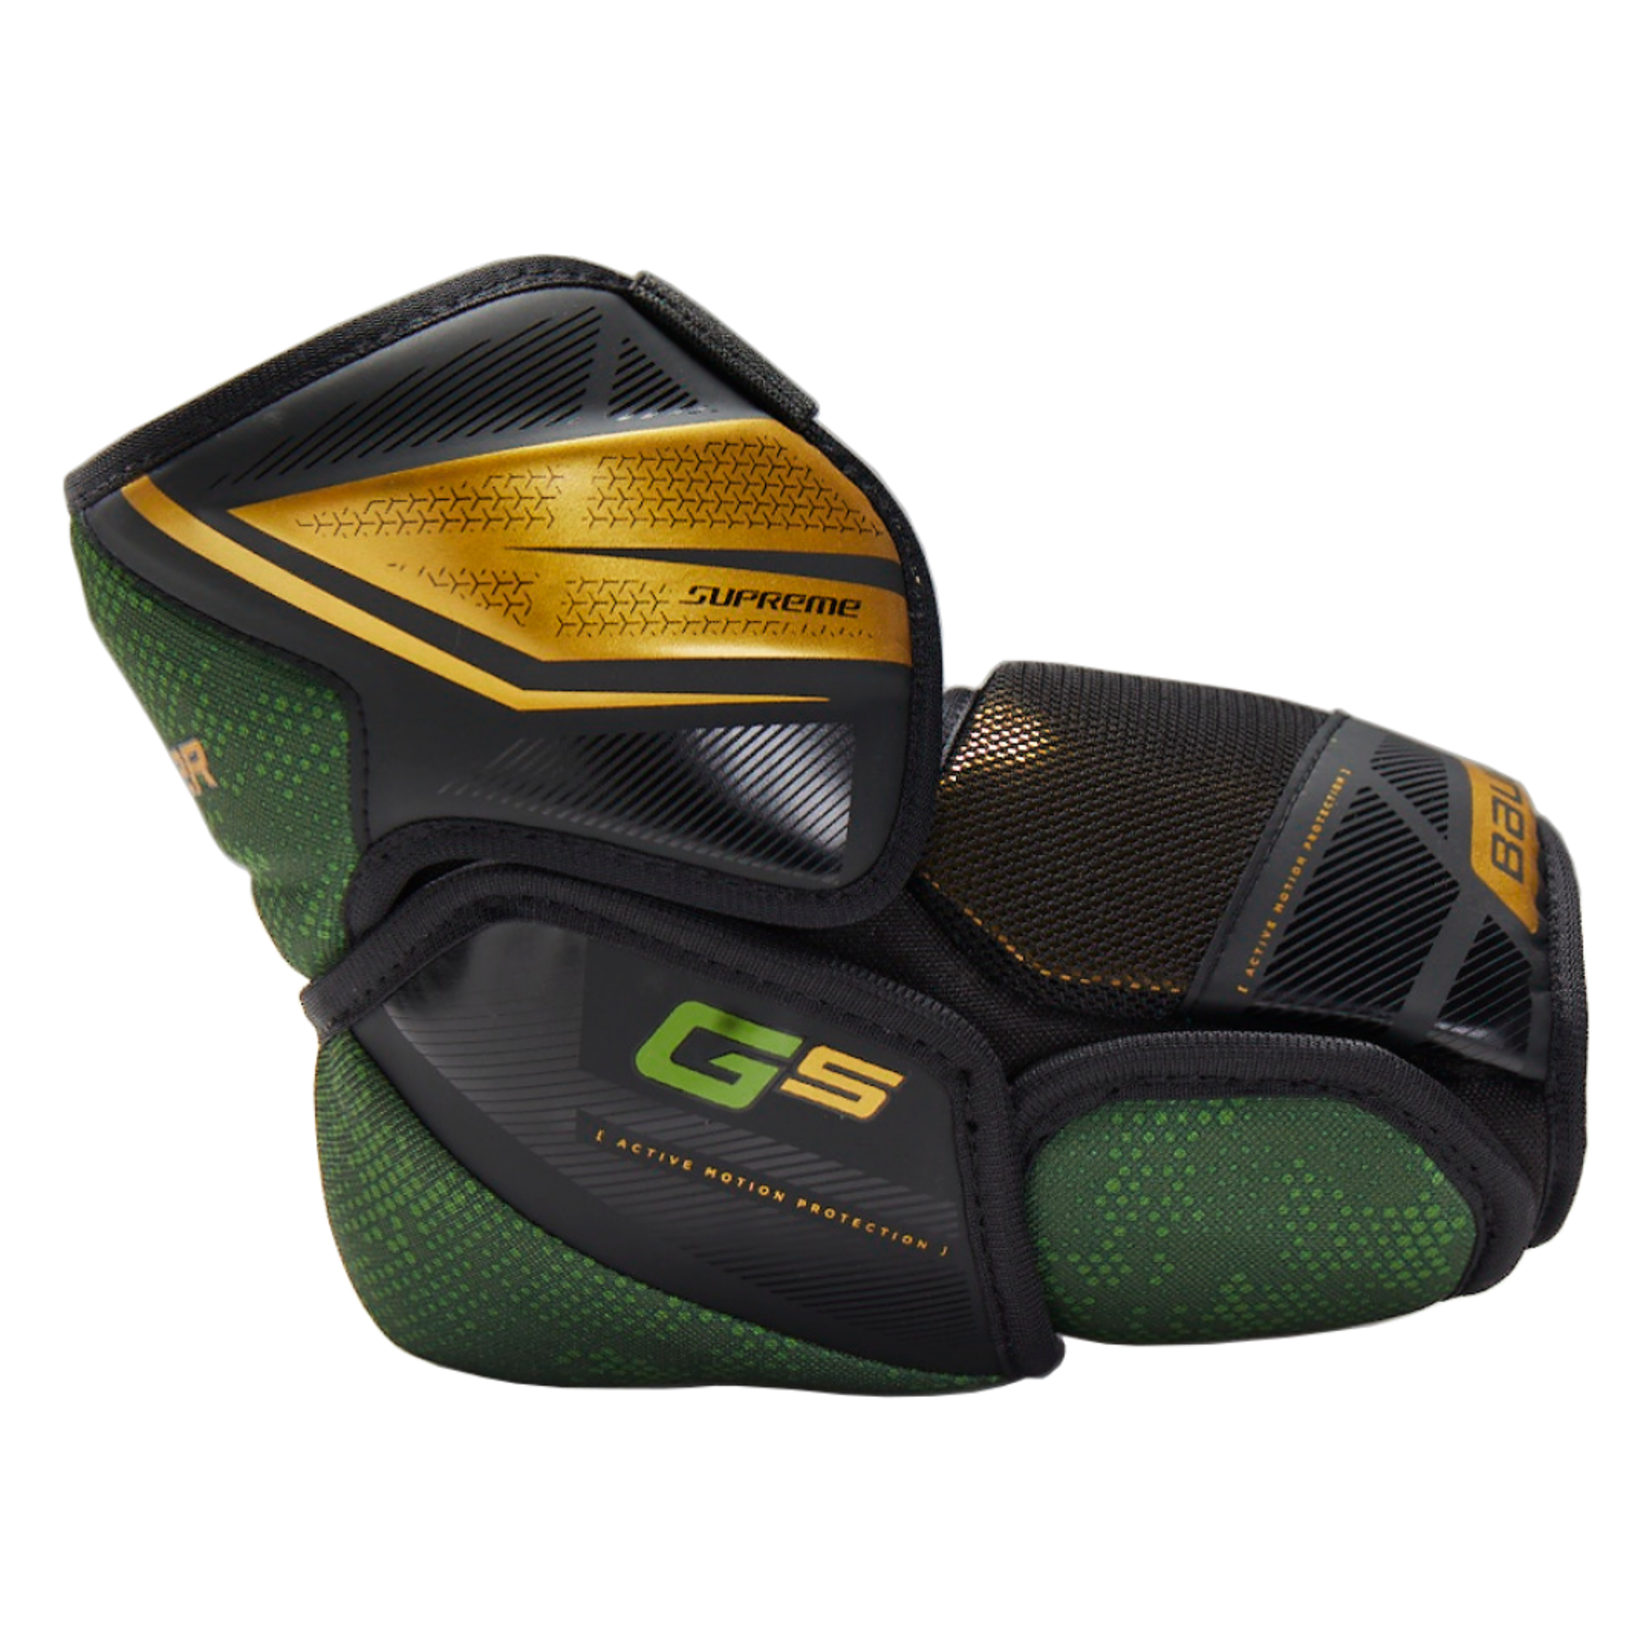 S21 Supreme GS Elbow Pad - Int